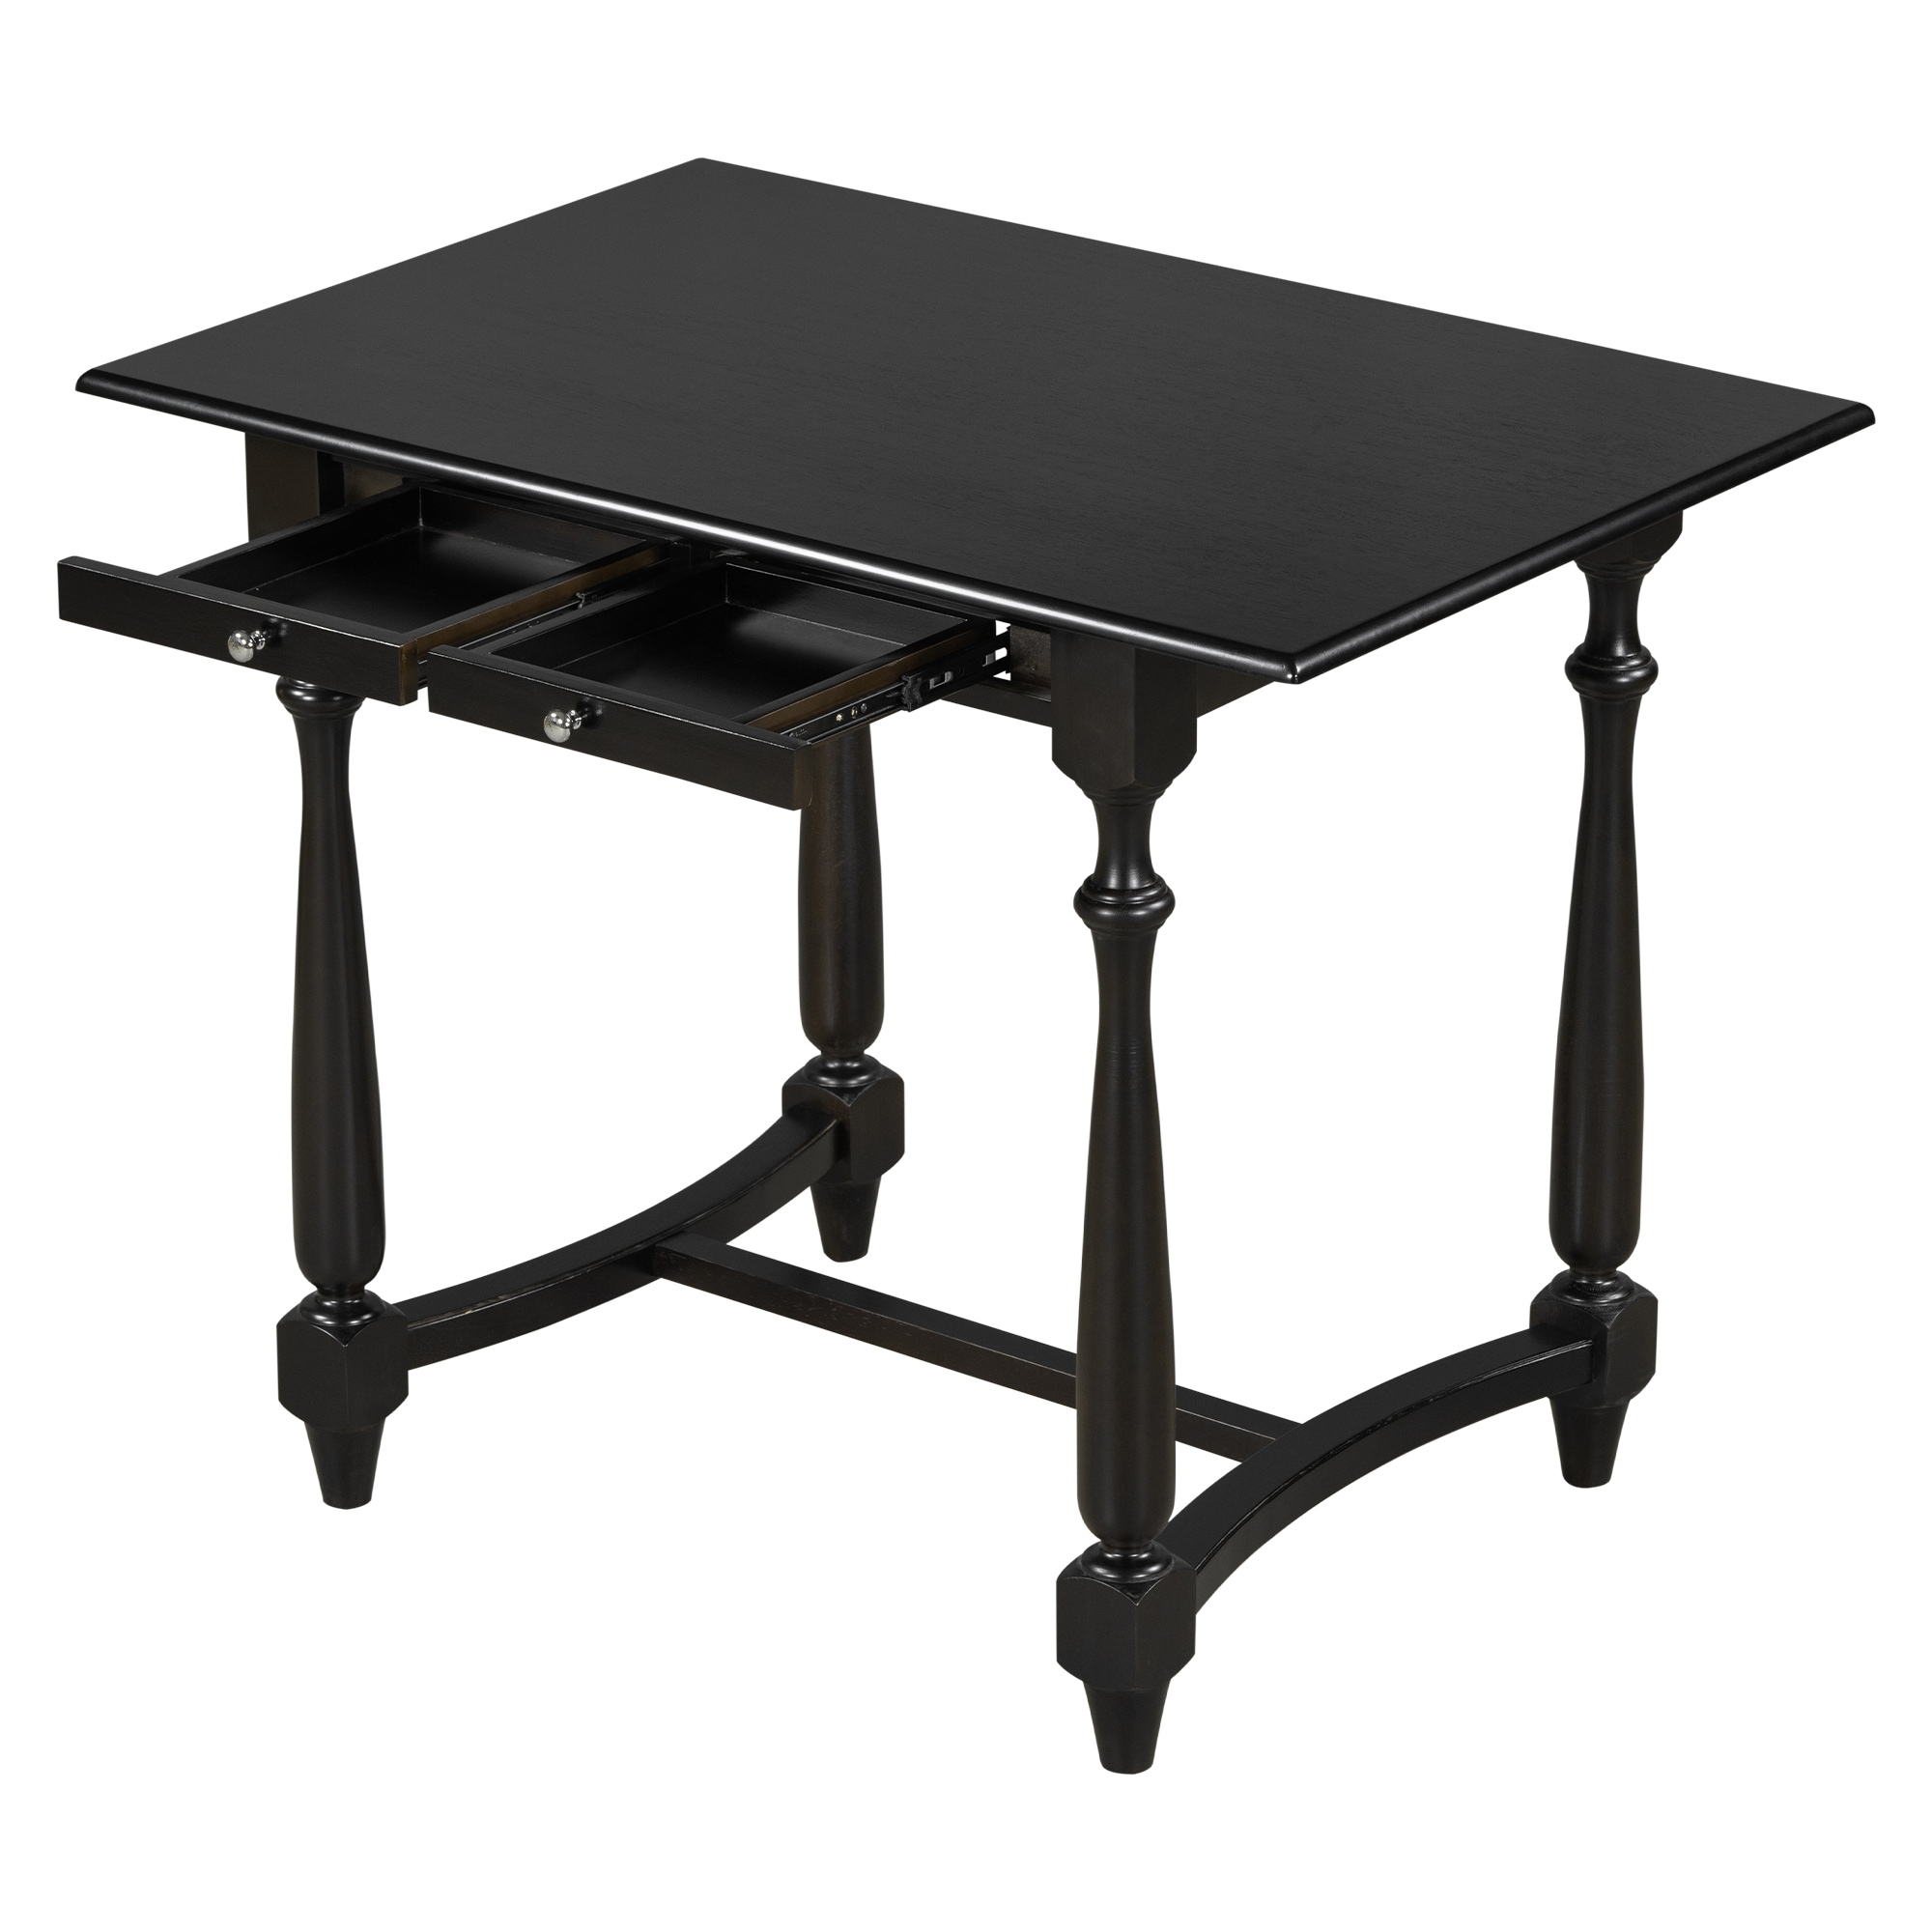 45x30 inch Rectangular Dining Table,Counter Height Table with Storage  Drawer, Solid Wood Kitchen & Dining Room Table with Iron-Covered Footrest